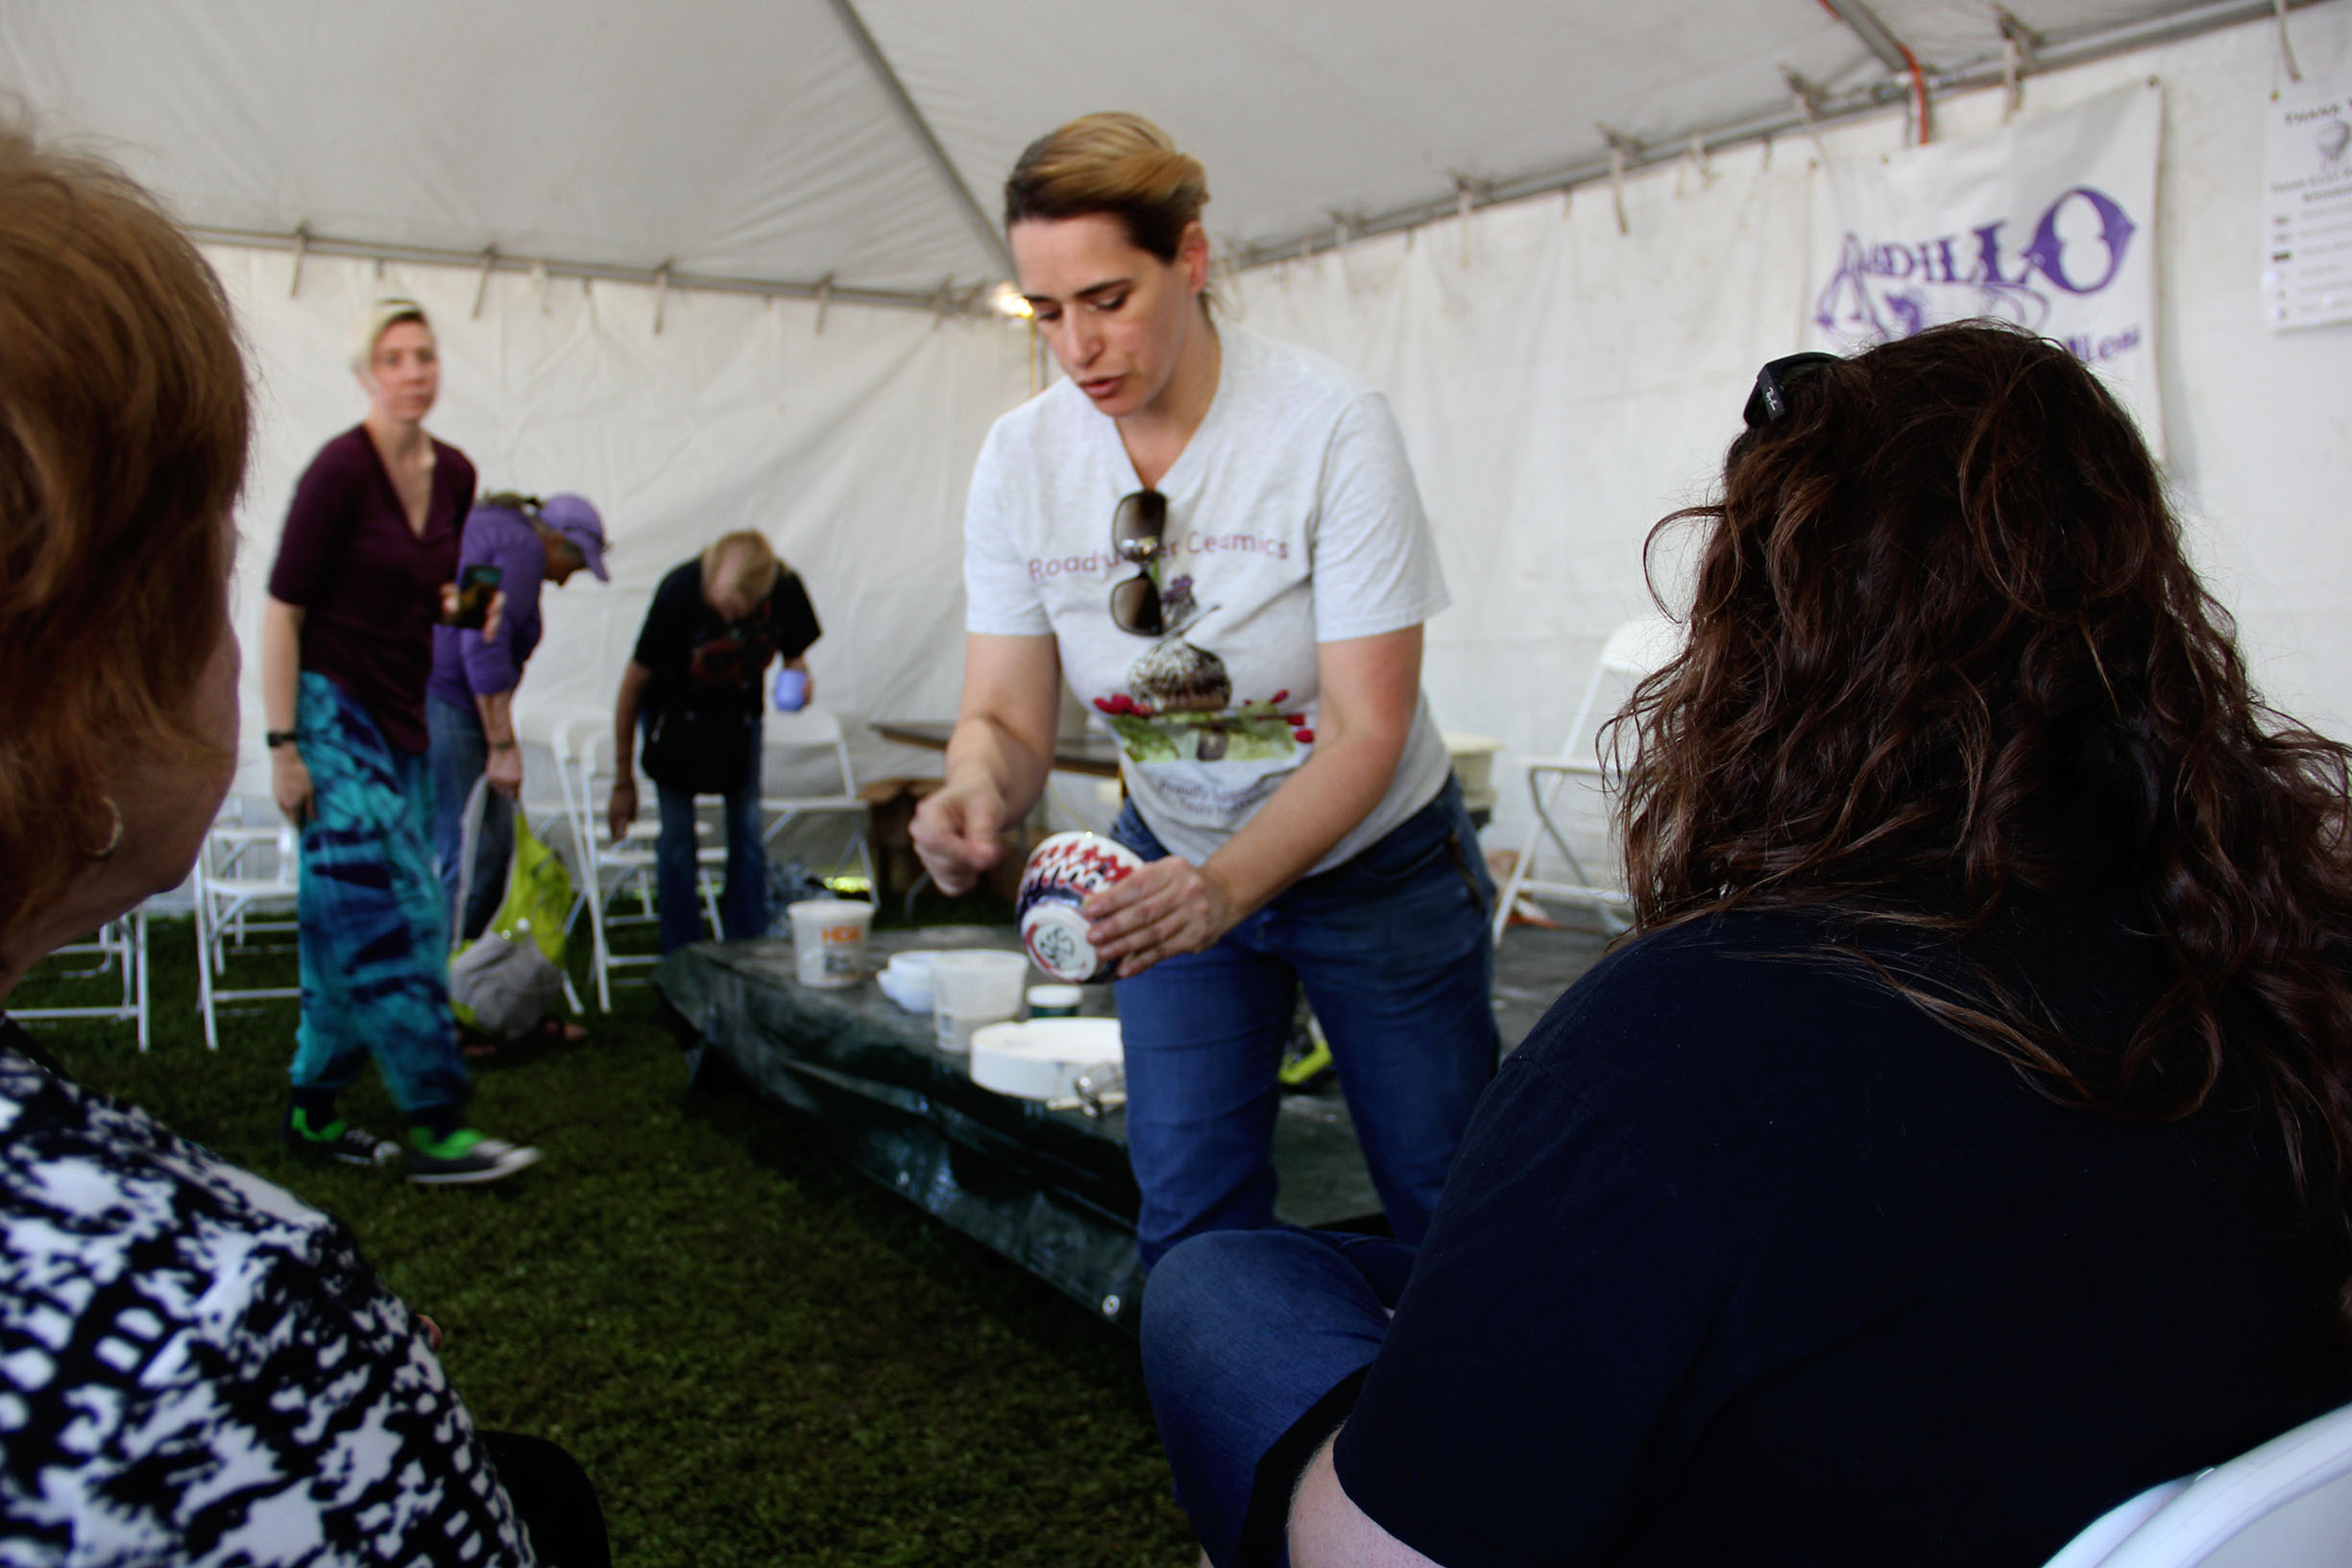 PHOTO: In addition to selling work, many artists perform demos on their process every year. Demos, like Jenny Smith’s here, give guests a chance to ask specific questions to the artist with physical examples. Photo by The Signal Online Editor Alyssa Shotwell.